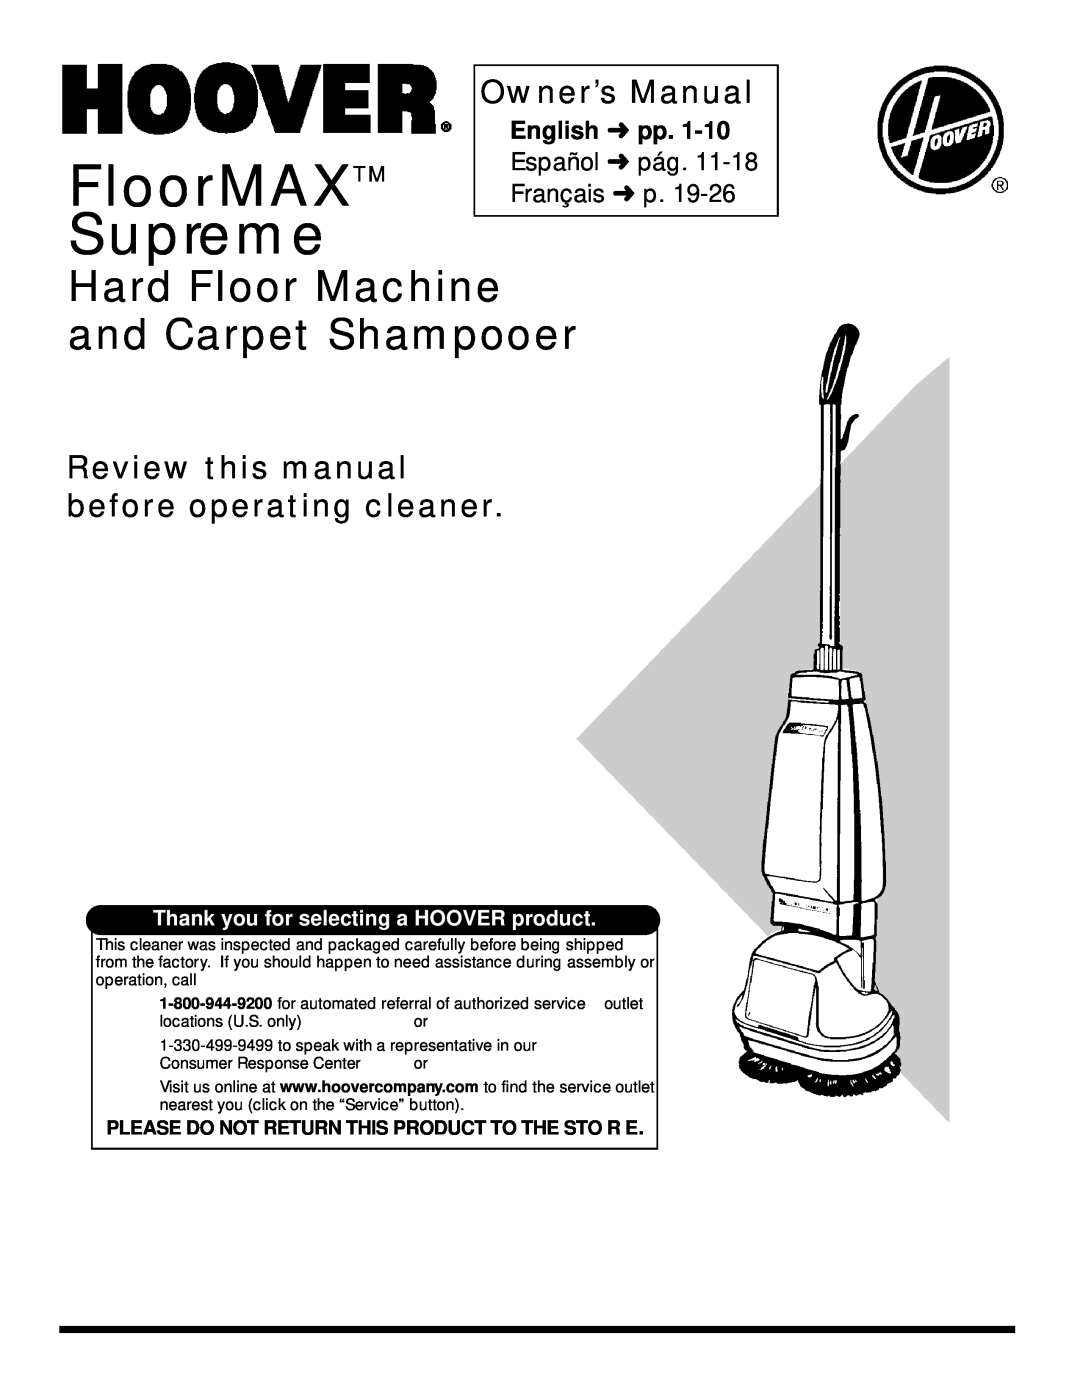 Hoover FloorMAX Supreme owner manual Owner’s Manual, Review this manual before operating cleaner 